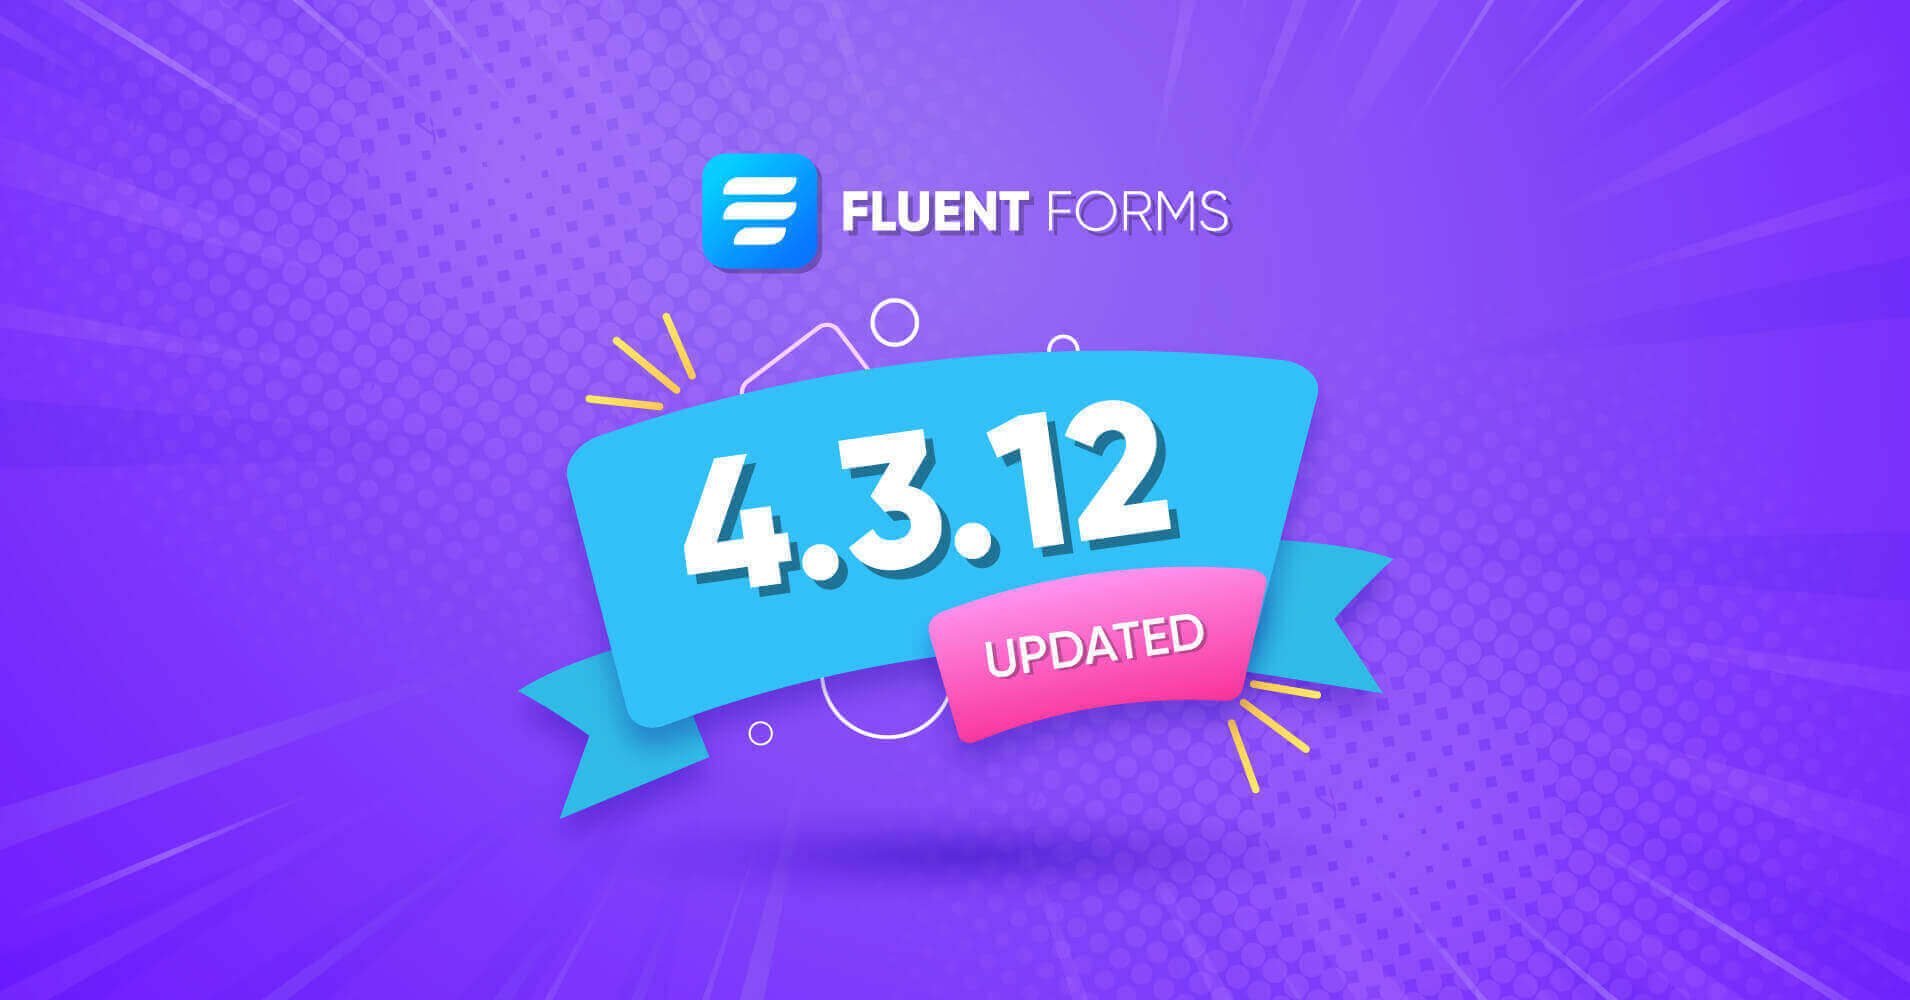 Fluent Forms update 4.3.12 release note